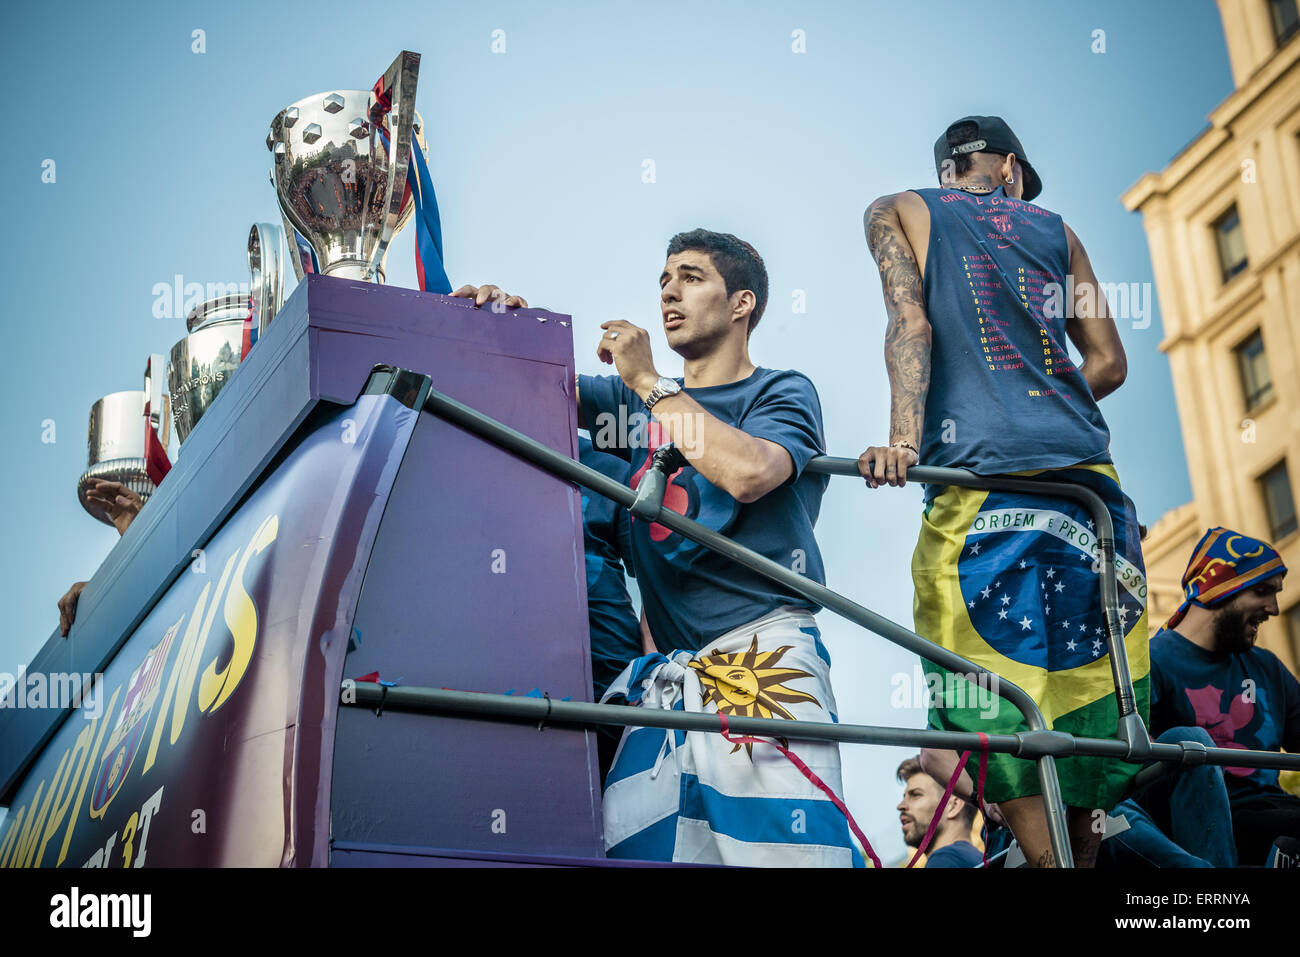 Barcelona, Catalonia, Spain. 7th June, 2015. FC Barcelona's centre-back GERARD PIQUE stands behind the trophies on the top deck of an open-topped bus during the triple victory parade through Barcelona to celebrate the 2nd 'triple' in the clubs history Credit:  Matthias Oesterle/ZUMA Wire/ZUMAPRESS.com/Alamy Live News Stock Photo